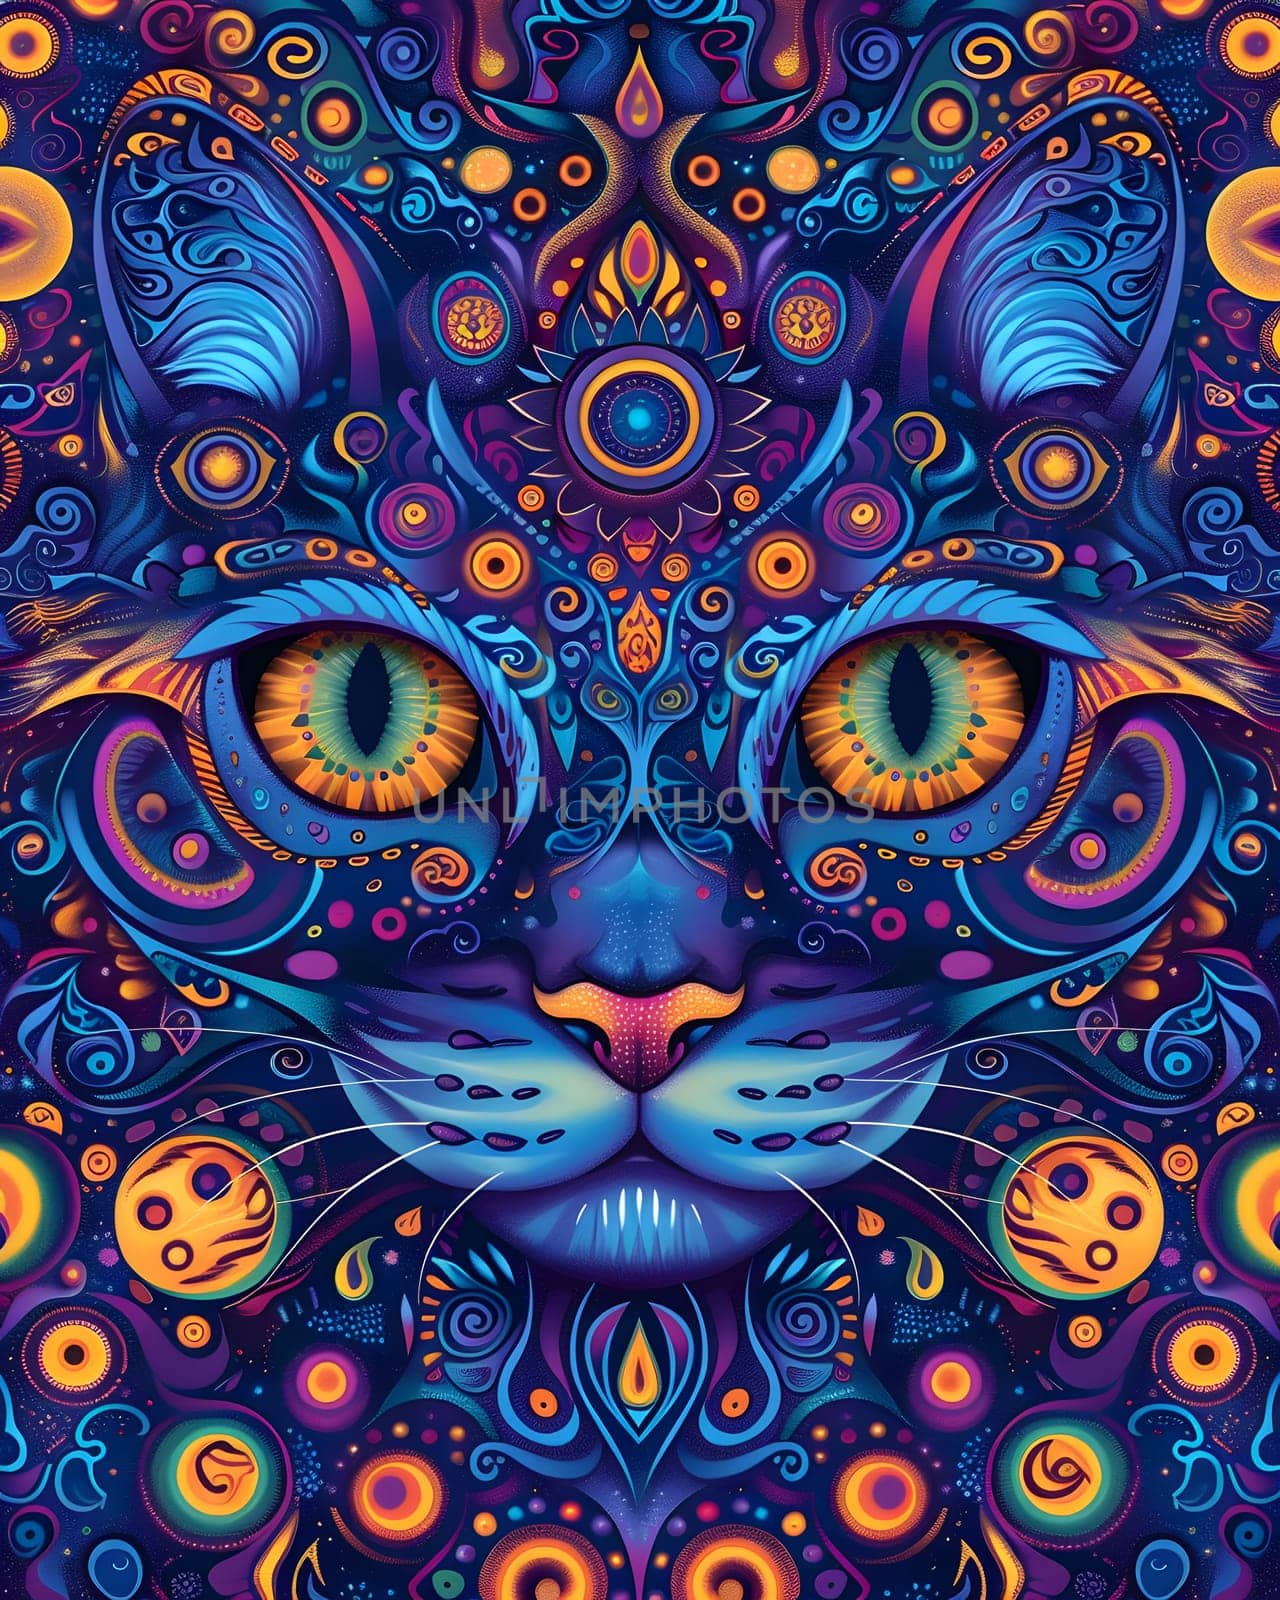 A vibrant painting of a Felidae organisms face with intricate patterns and whiskers. The small to mediumsized cat is captured in aqua hues, creating a stunning piece of art